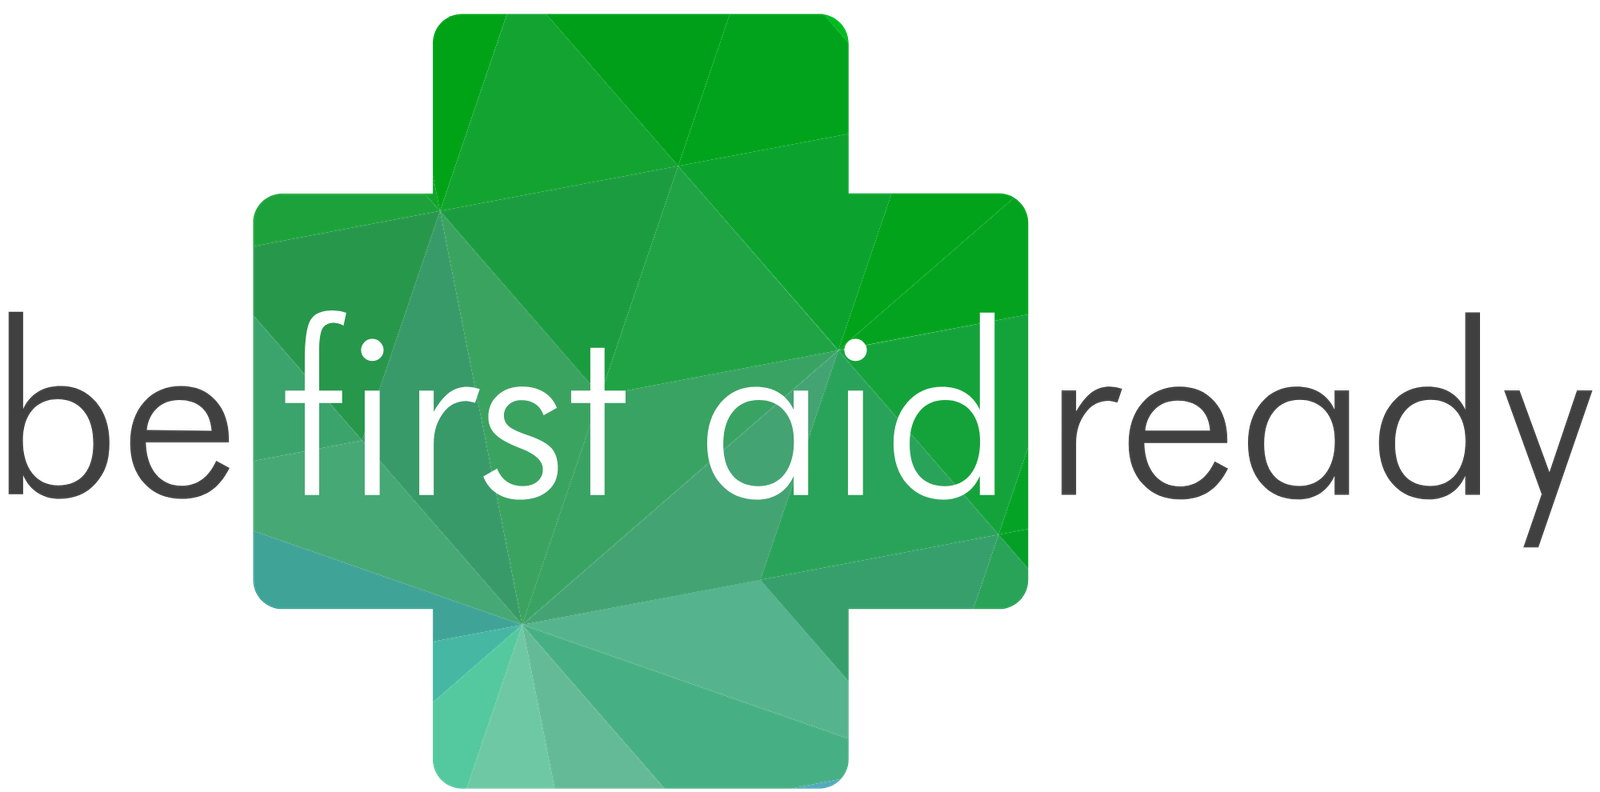 Be First Aid Ready